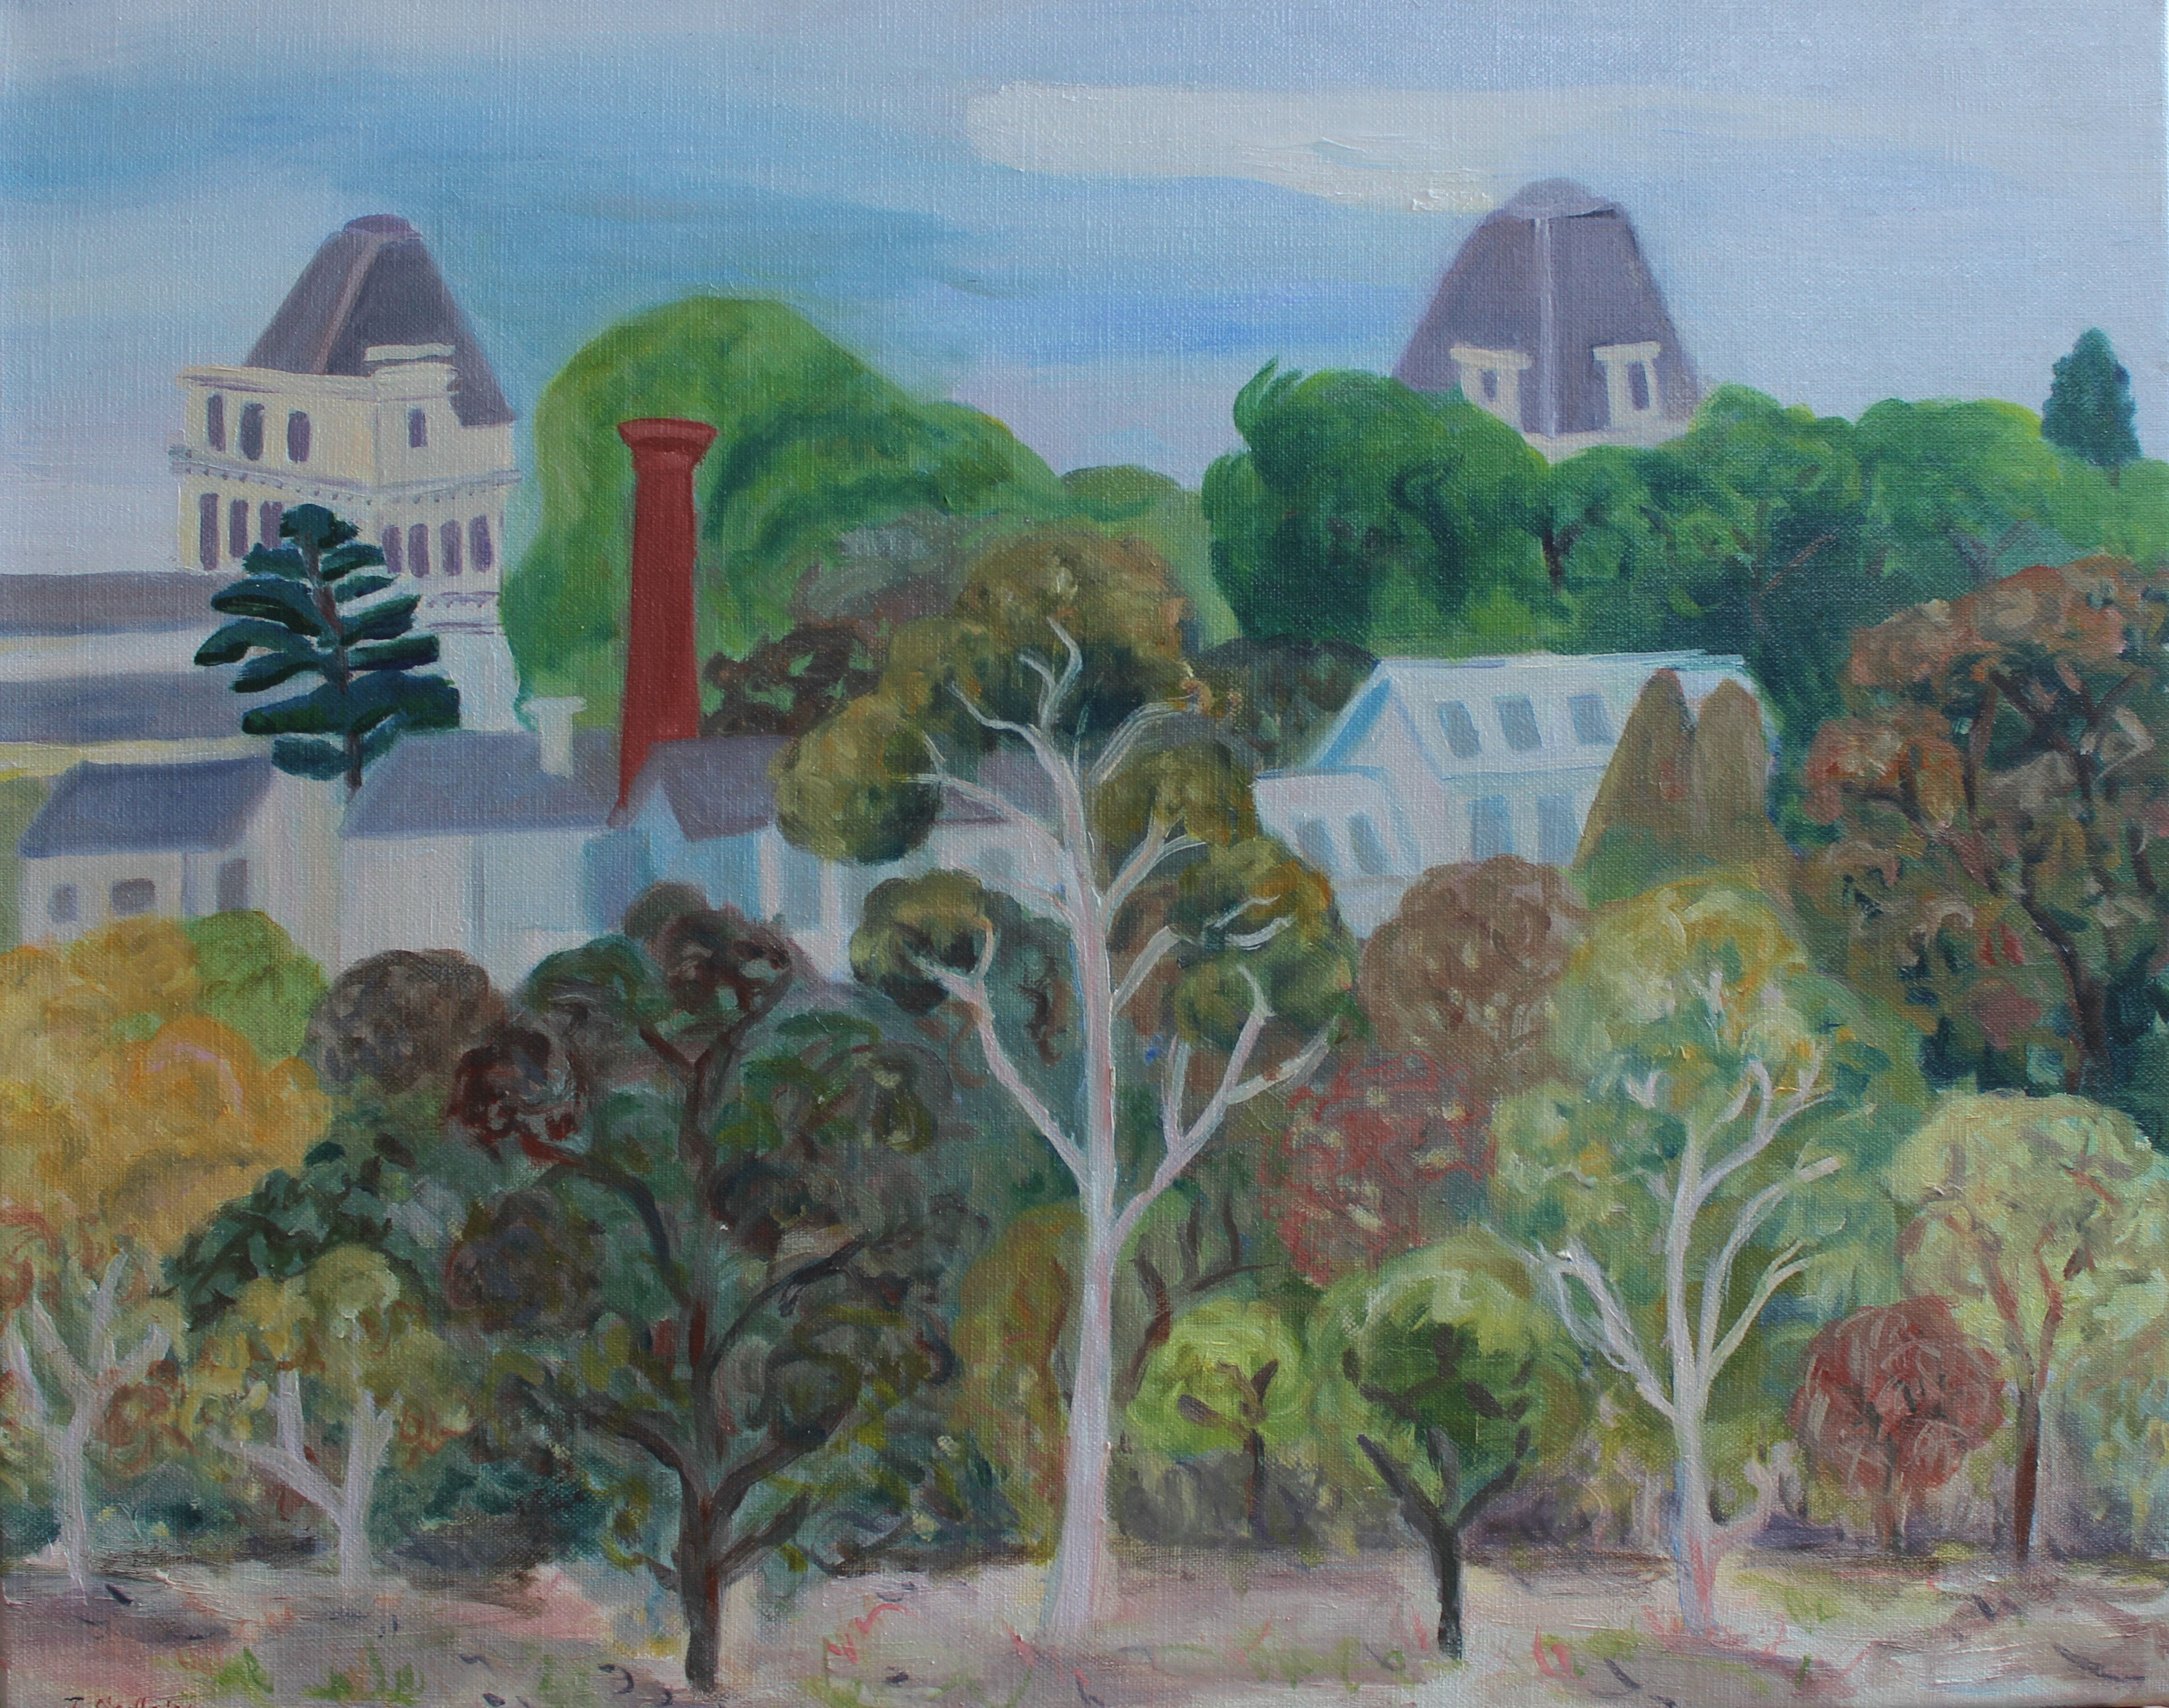 Justine Siedle The Towers, viewed from the hill in Kew. Oil on Linen 30 x 35 cm.